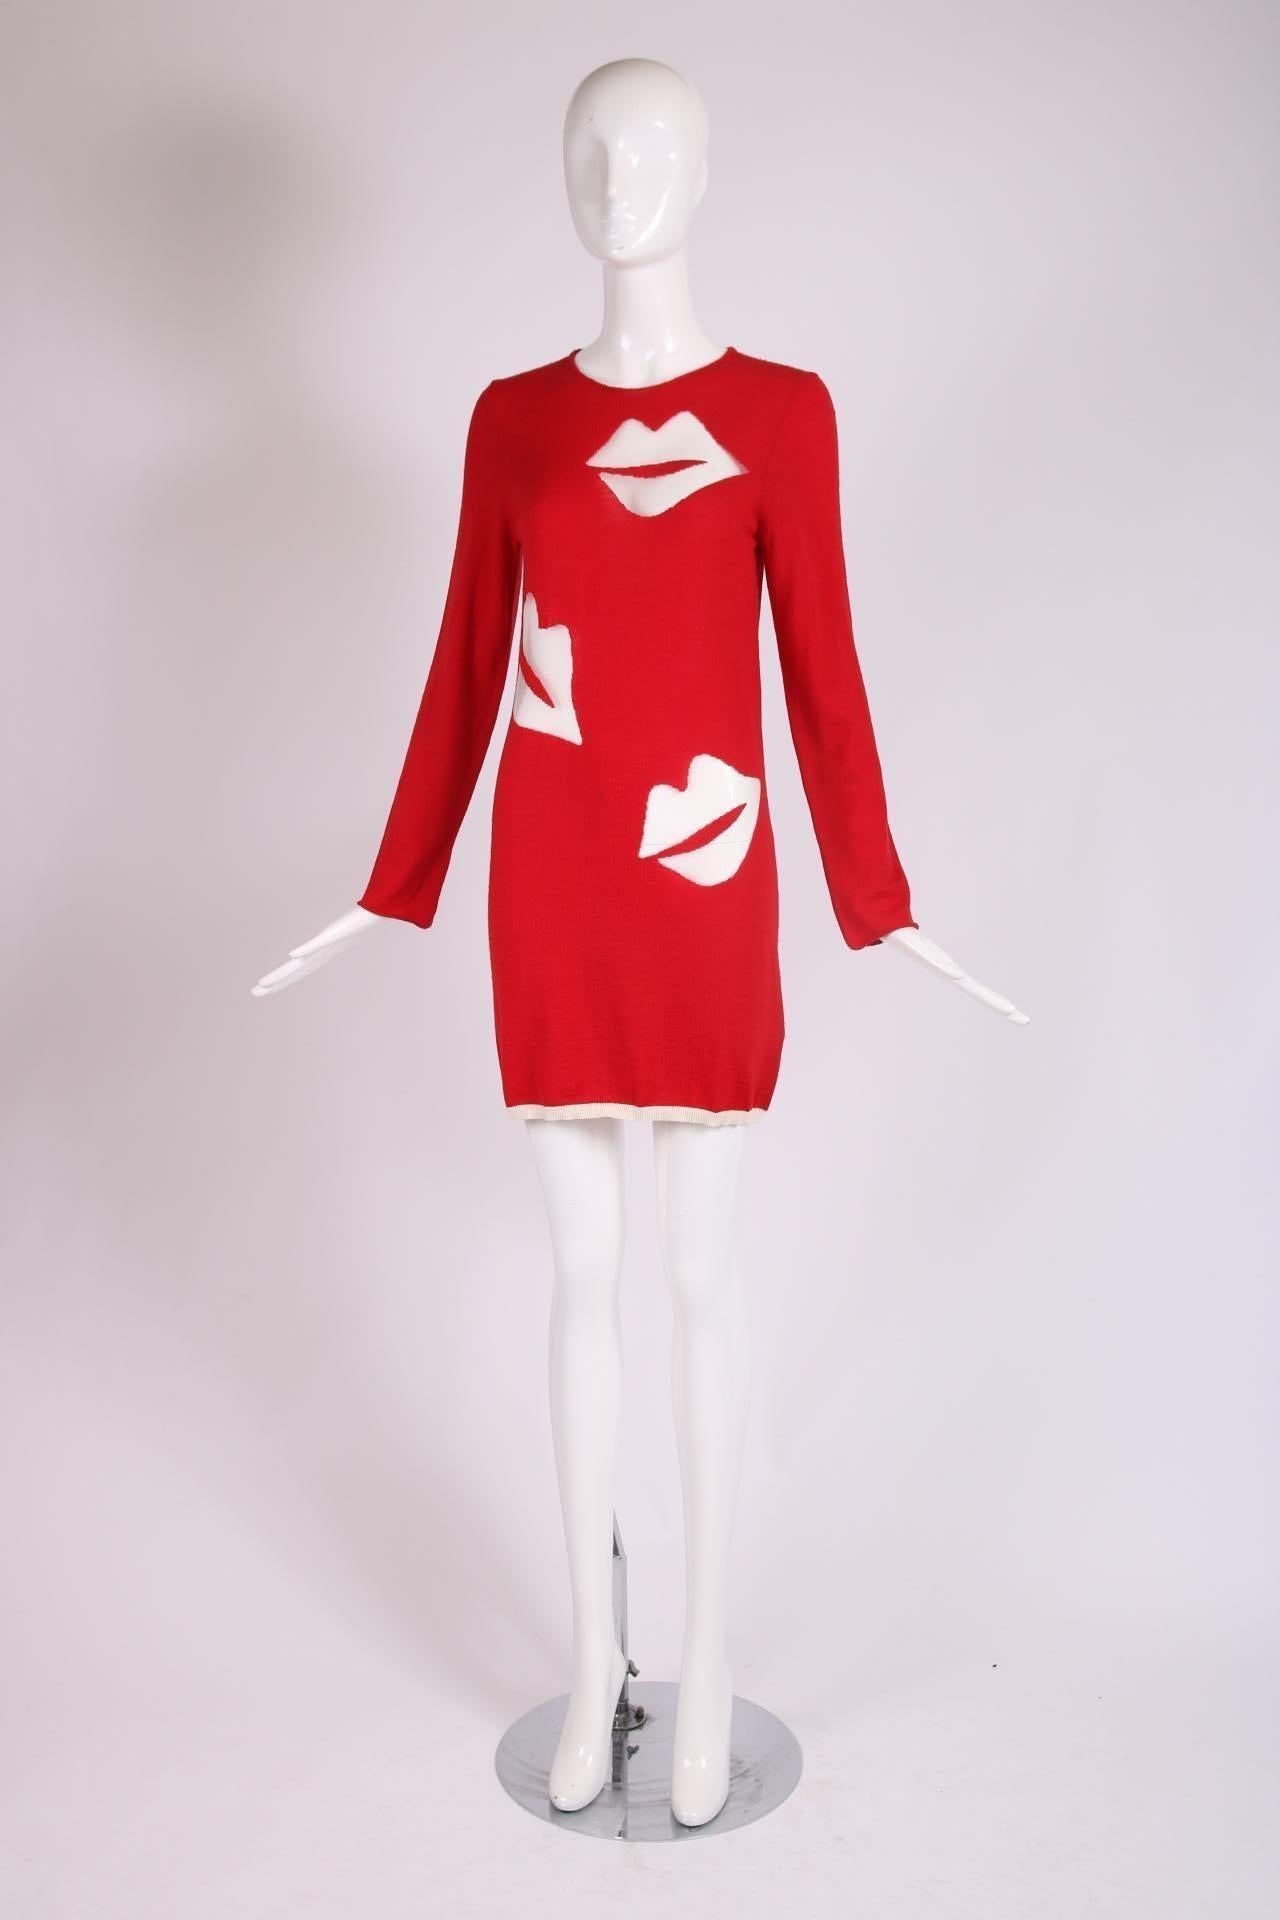 2008 Comme des Garcons red wool sweater dress or just oversized sweater with long sleeves, white cotton trim at the hem and transparent nylon lip motif throughout. Size S, in excellent condition. Please consult measurements.
Bust - 33